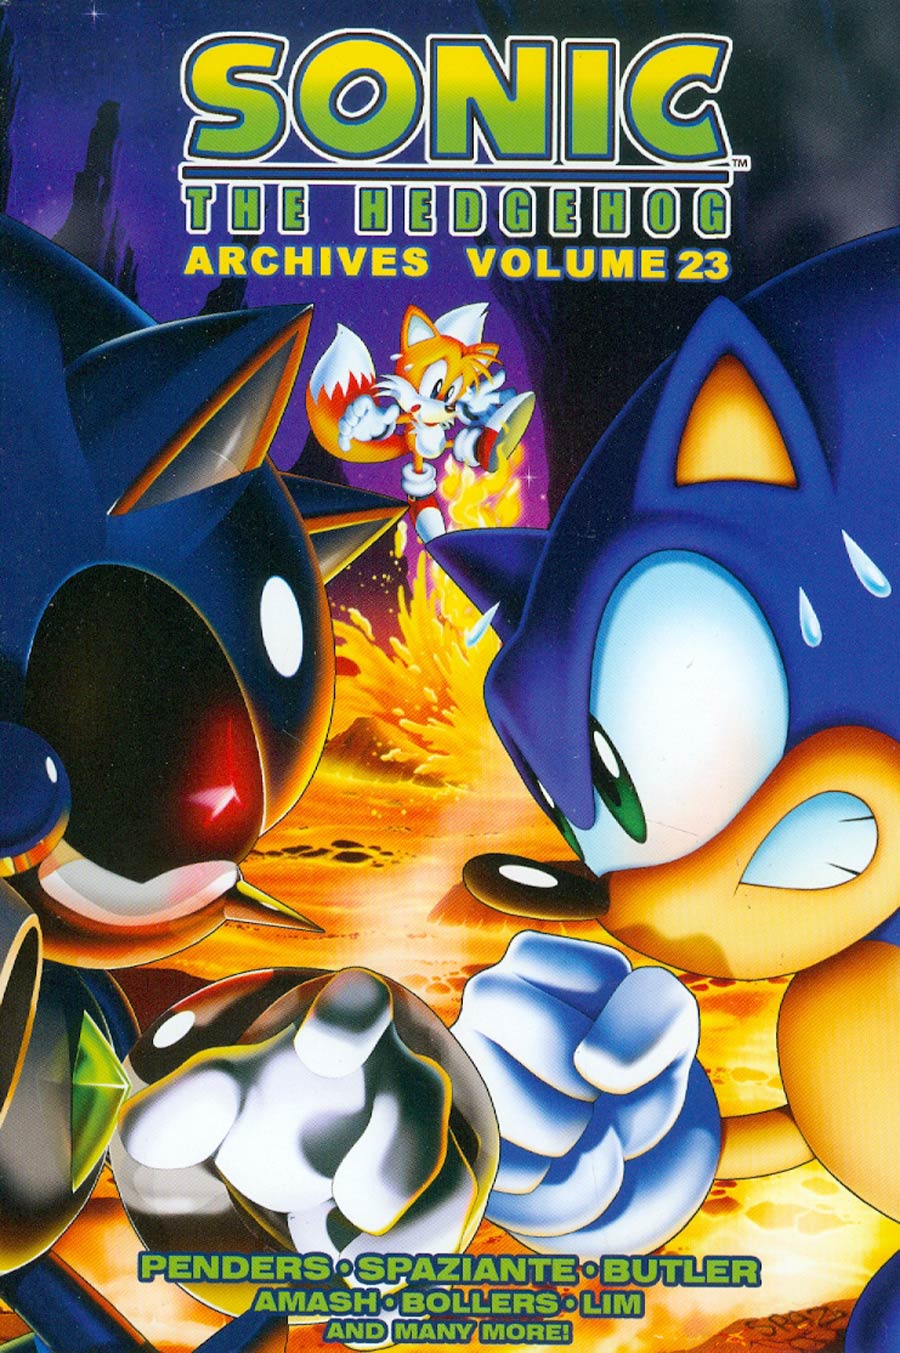 Sonic The Hedgehog Archives Vol 23 TP